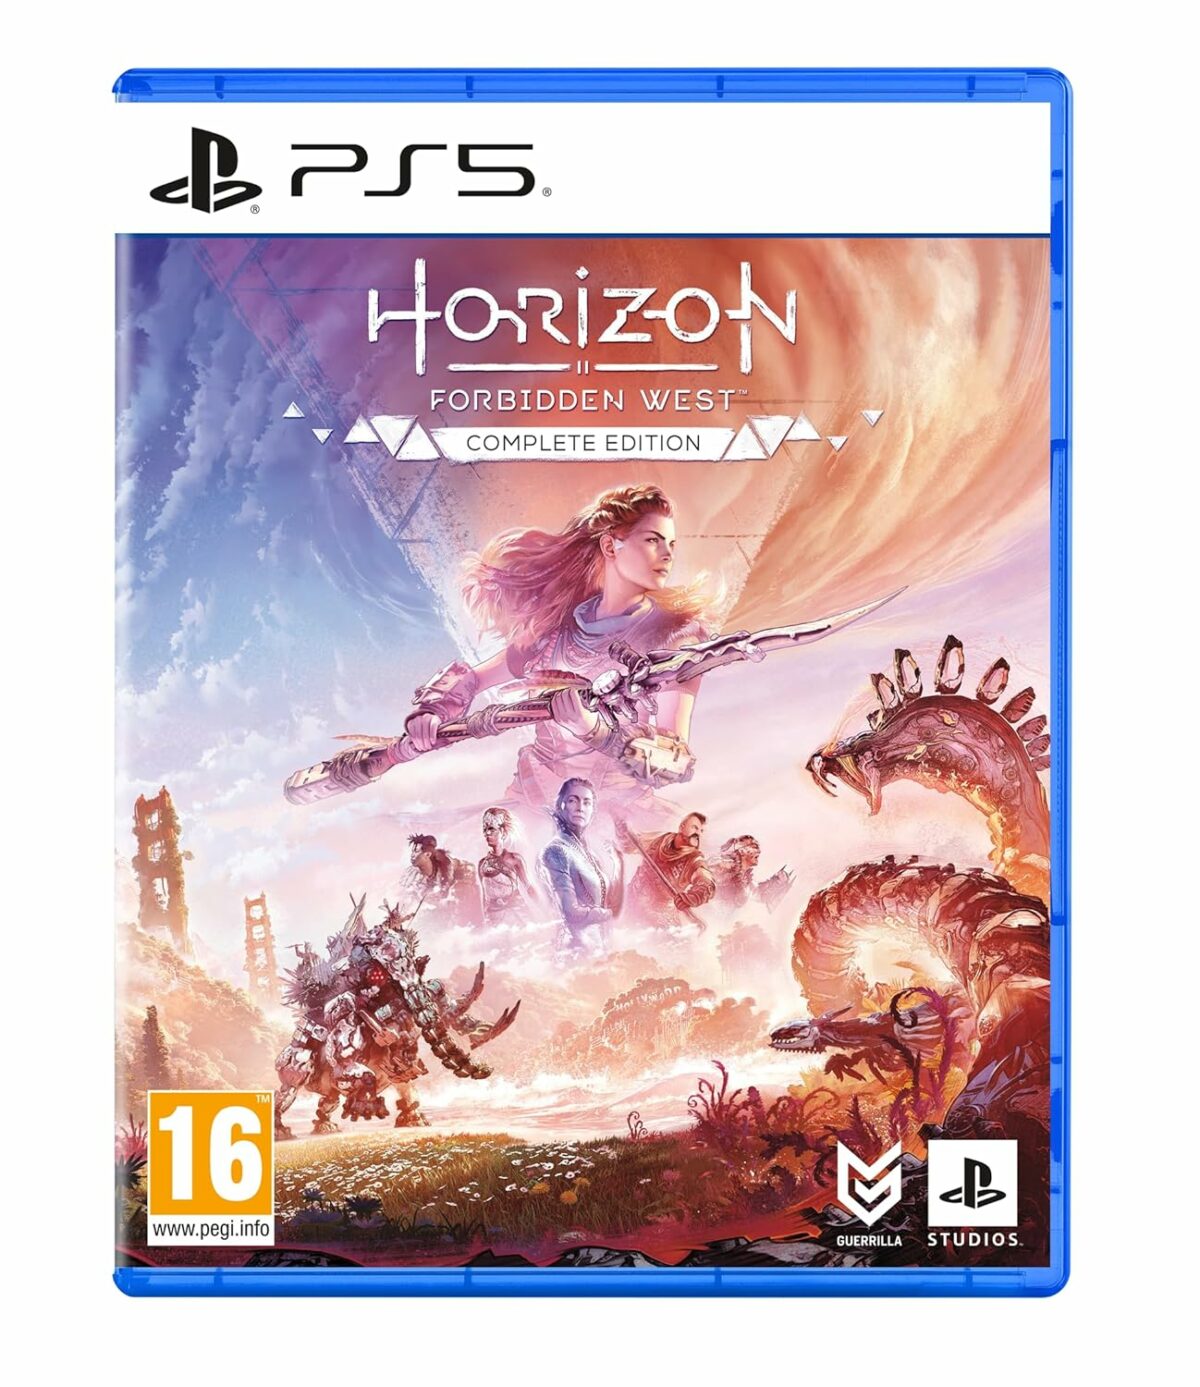 Horizon Forbidden West PS5 Complete Edition (New)